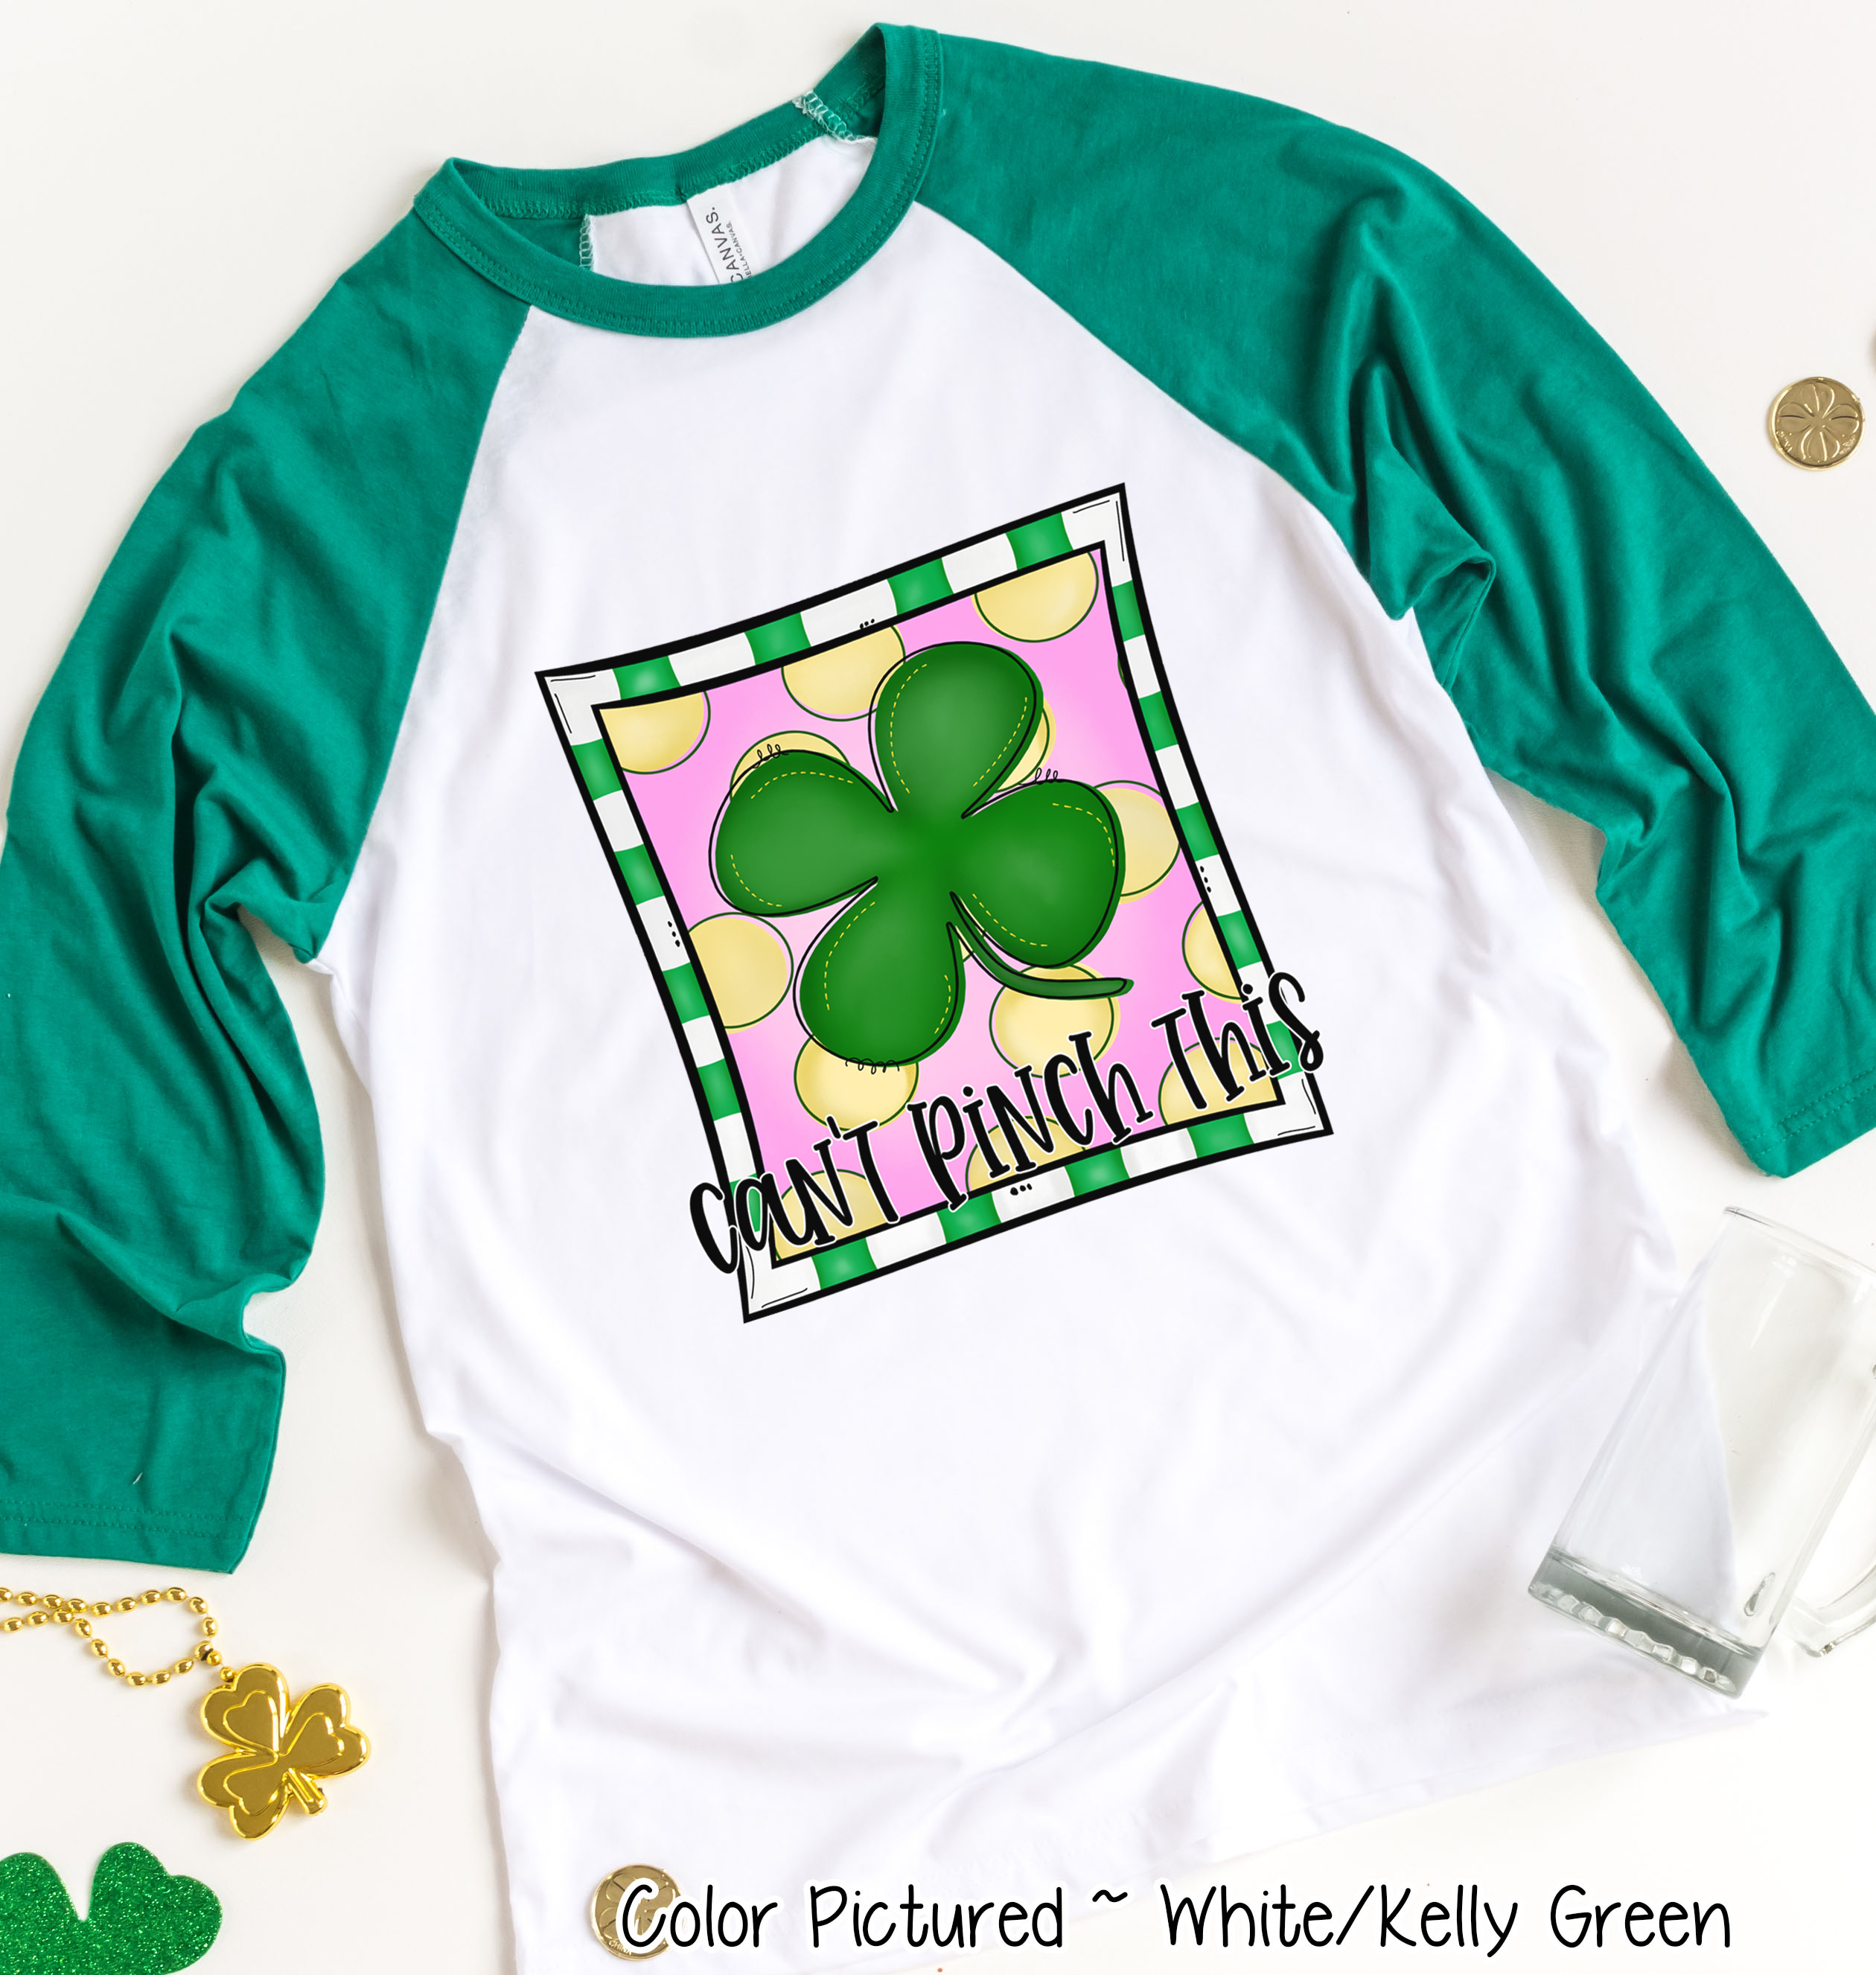 Can't Pinch This St Patricks Day Tee